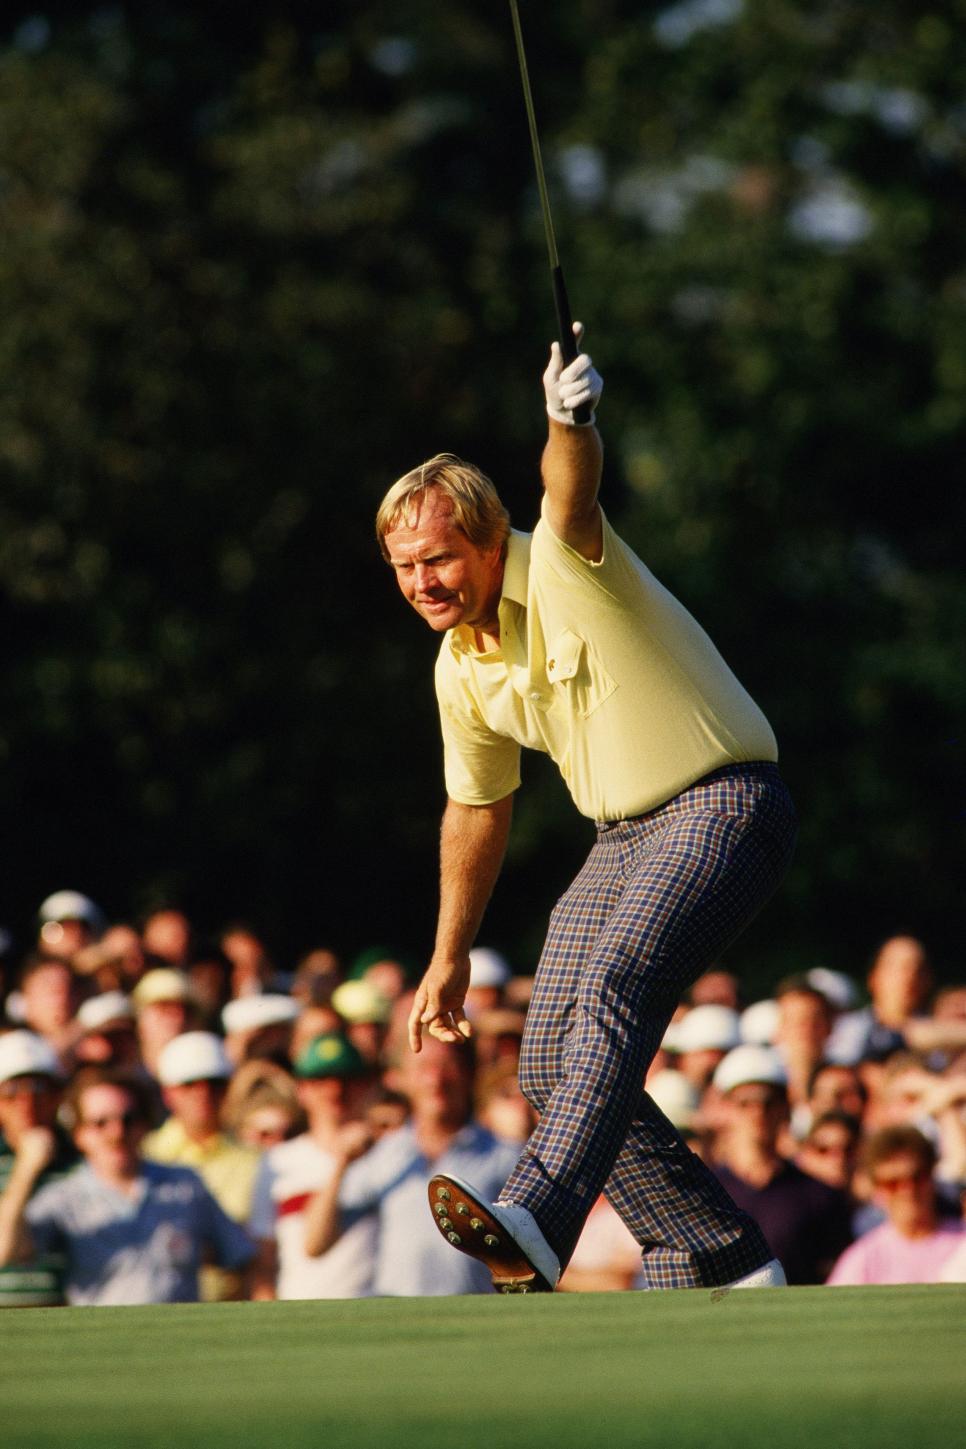 jack-nicklaus-1986-masters-17th-hole-yes-sir-putt.jpg